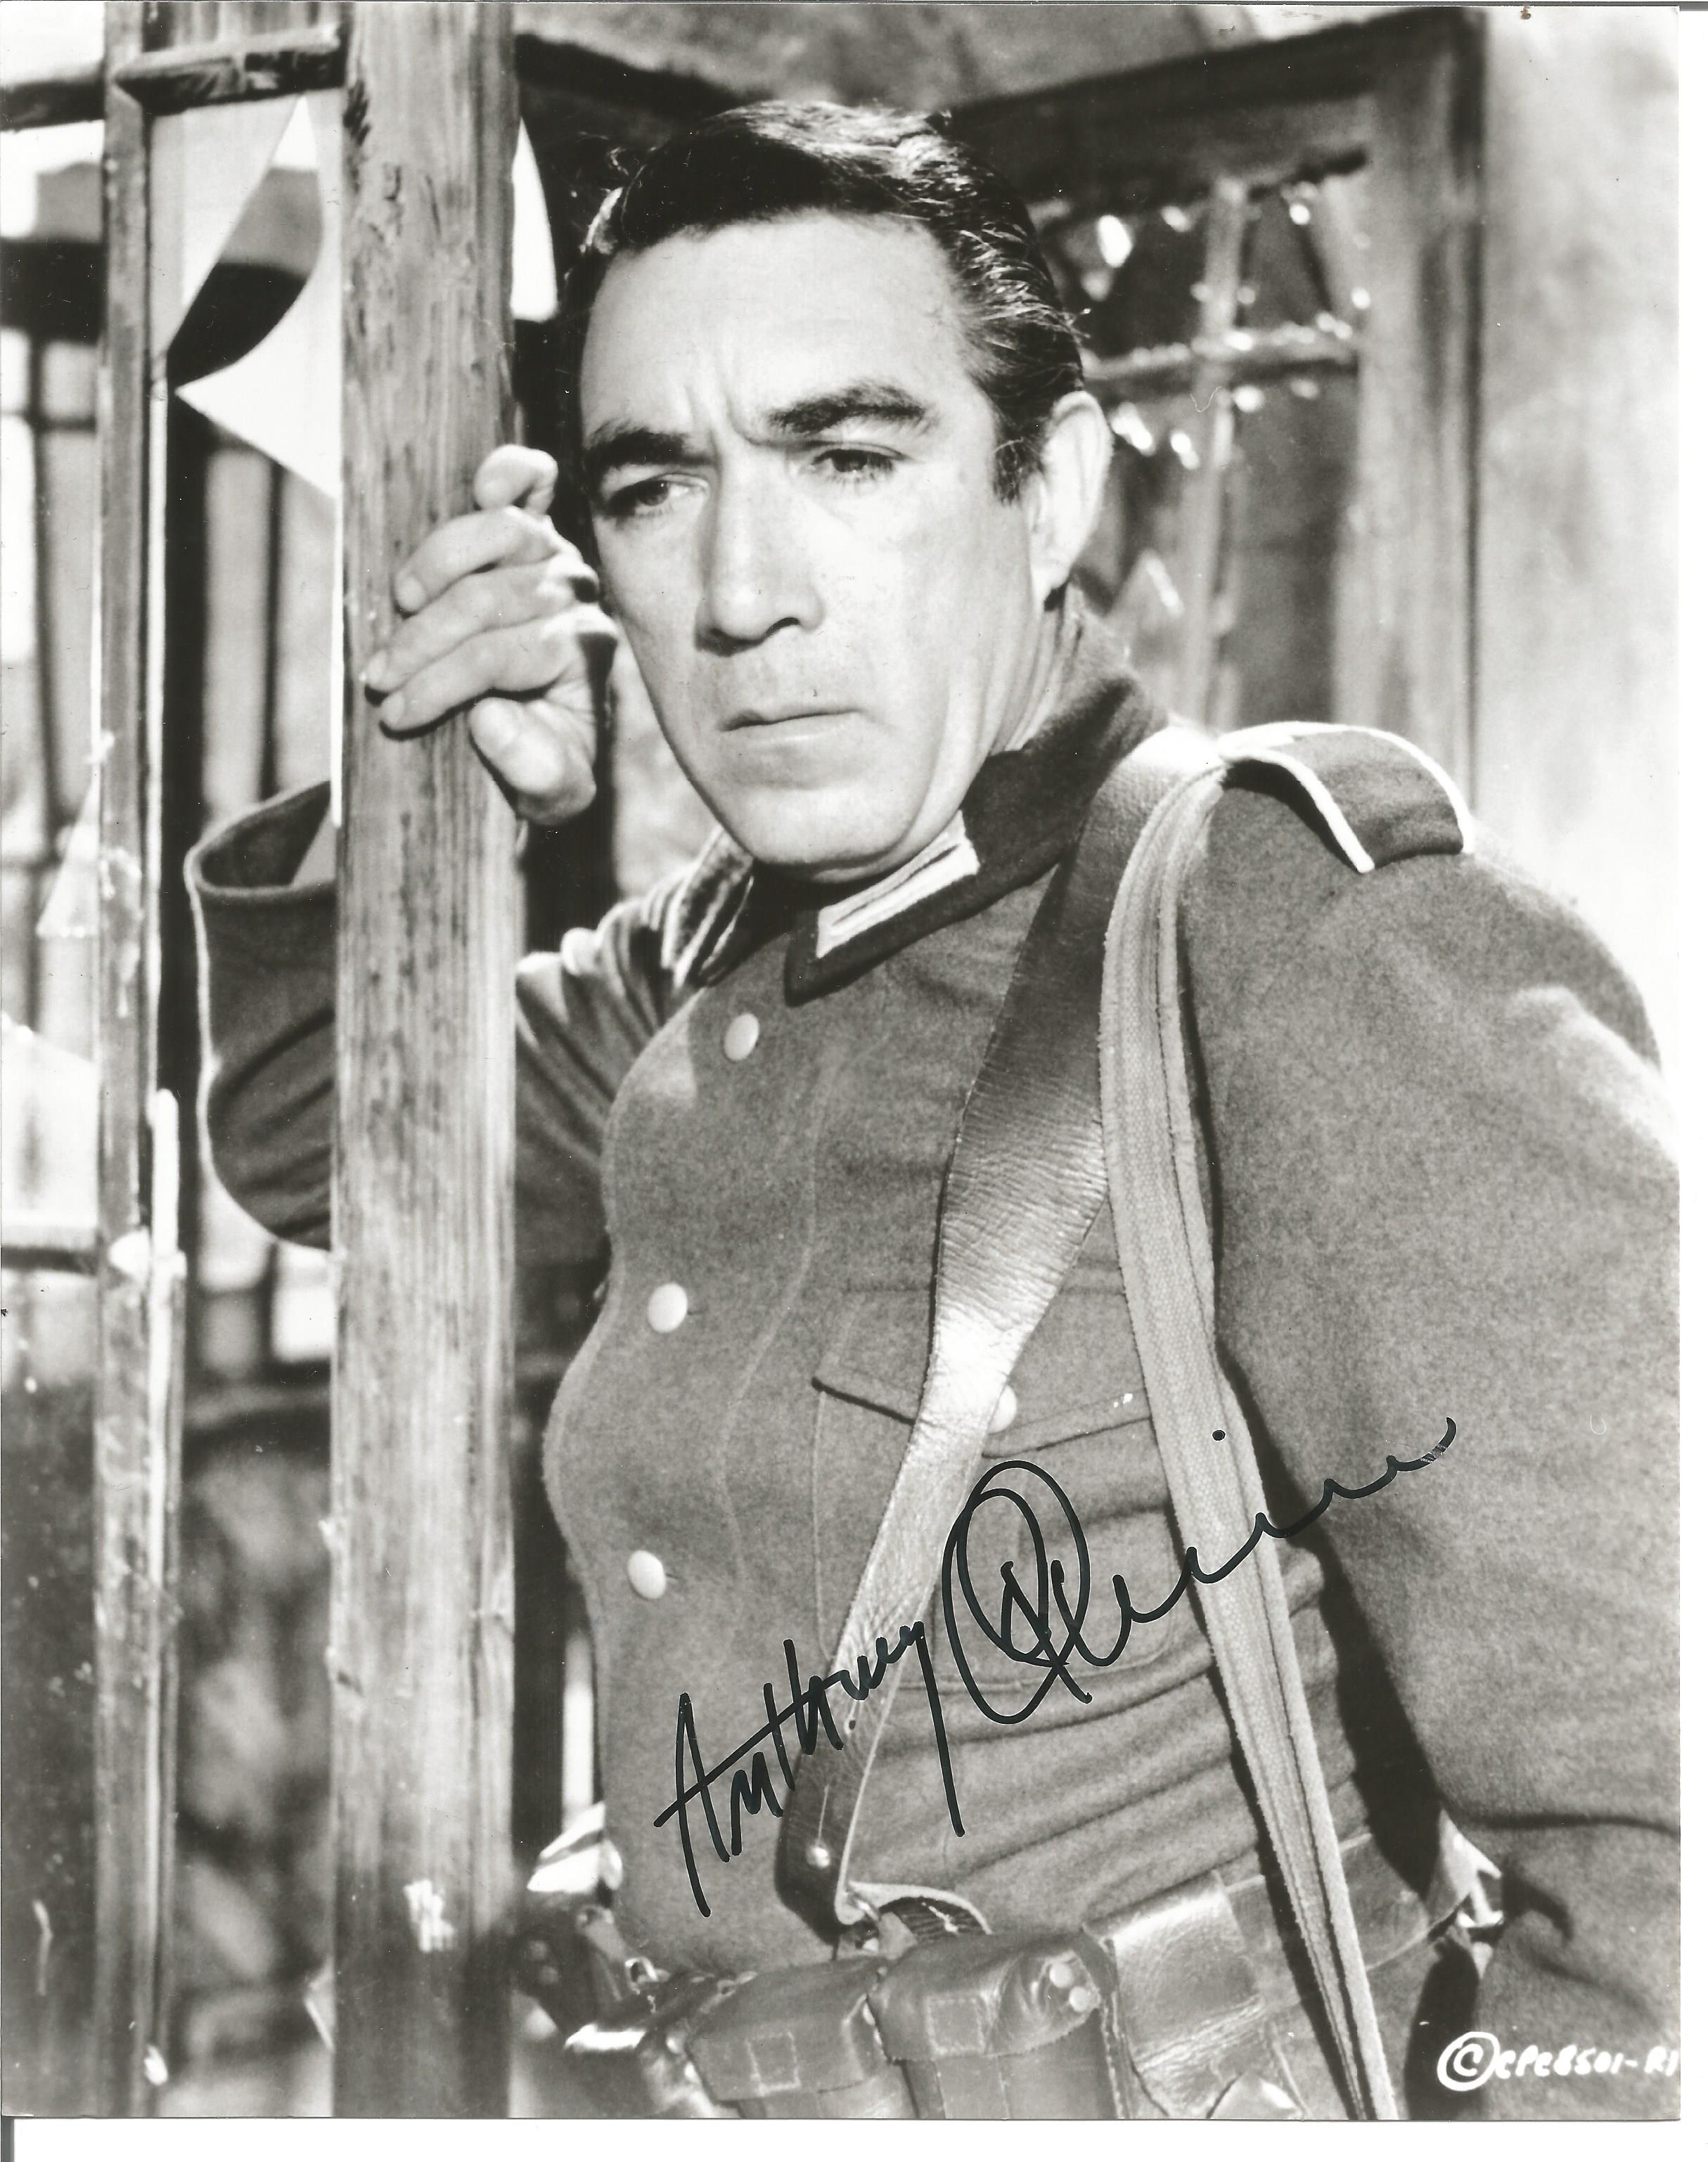 Anthony Quinn signed 10 x 8 inch b/w photo. Good Condition. All signed pieces come with a